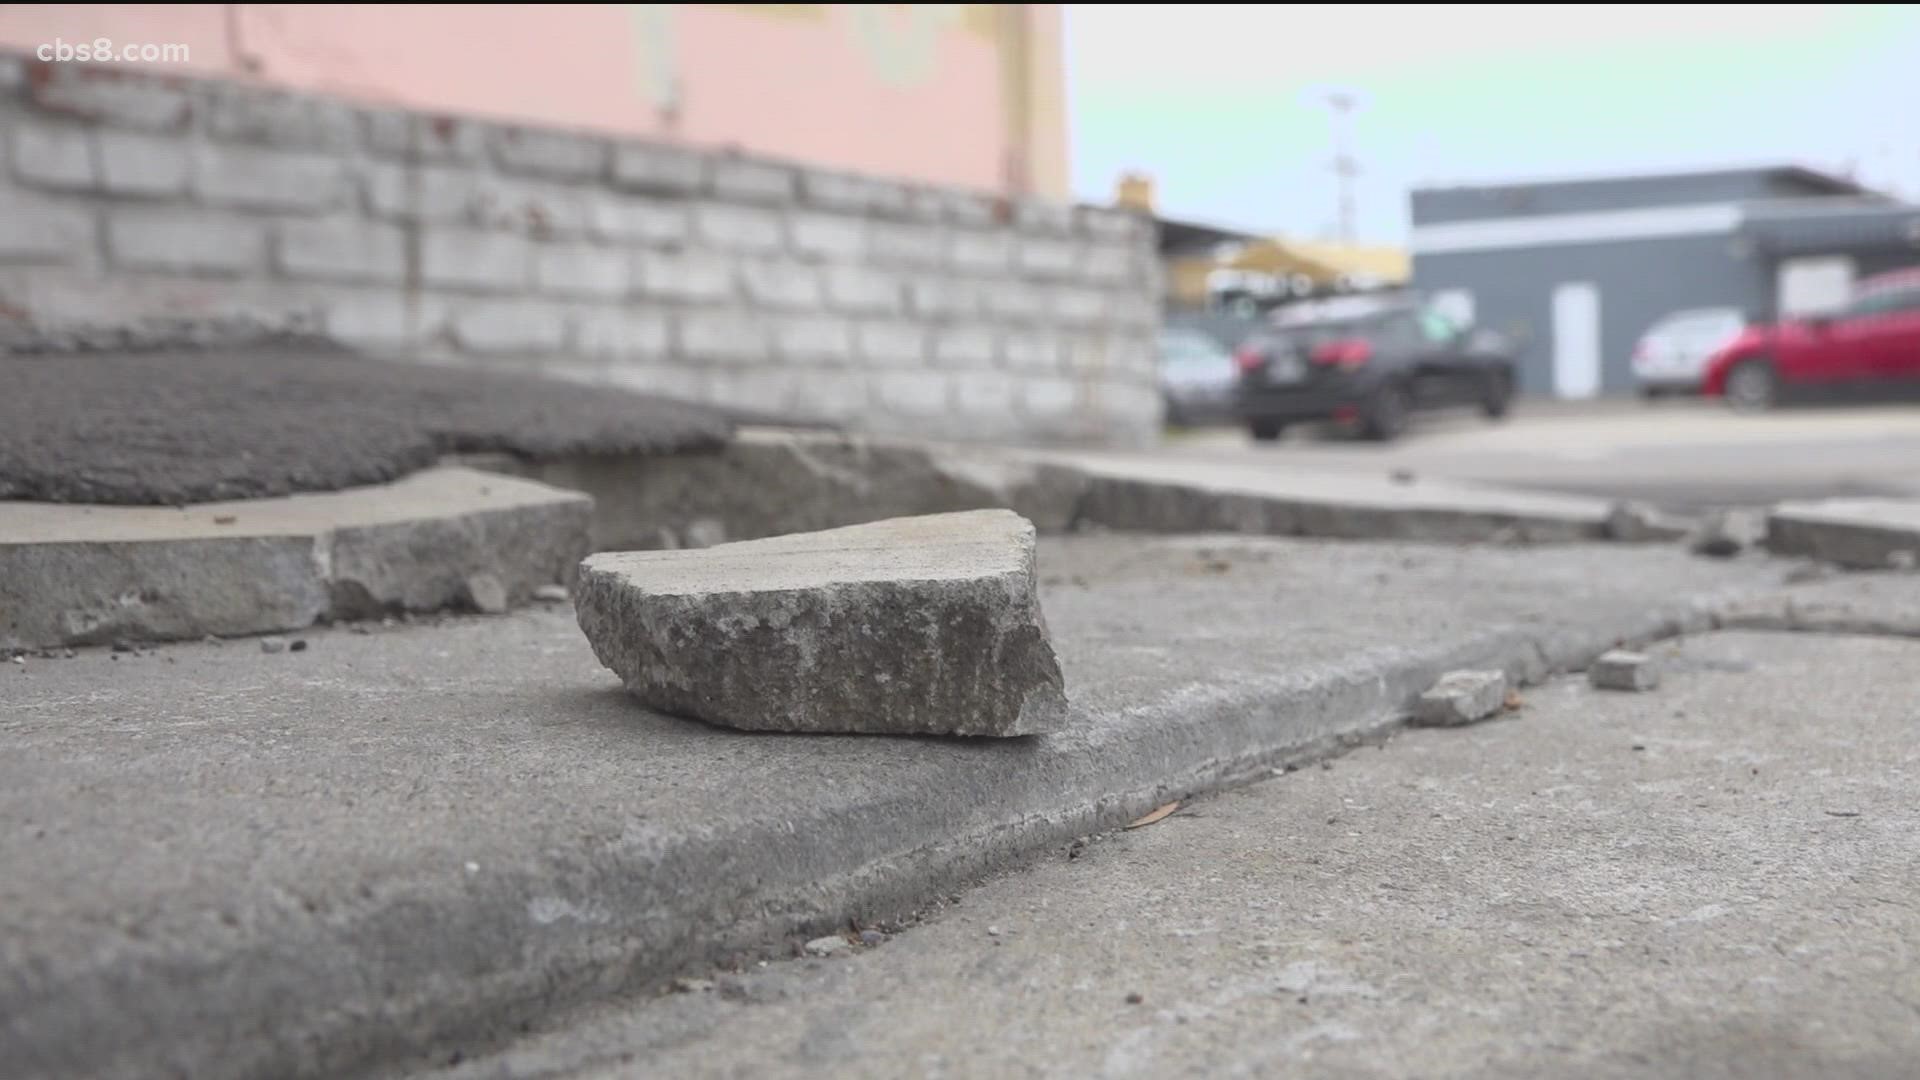 "The cement is bulking. There's potholes. There's crevices where disabled people cannot go through," said Susan Graham.